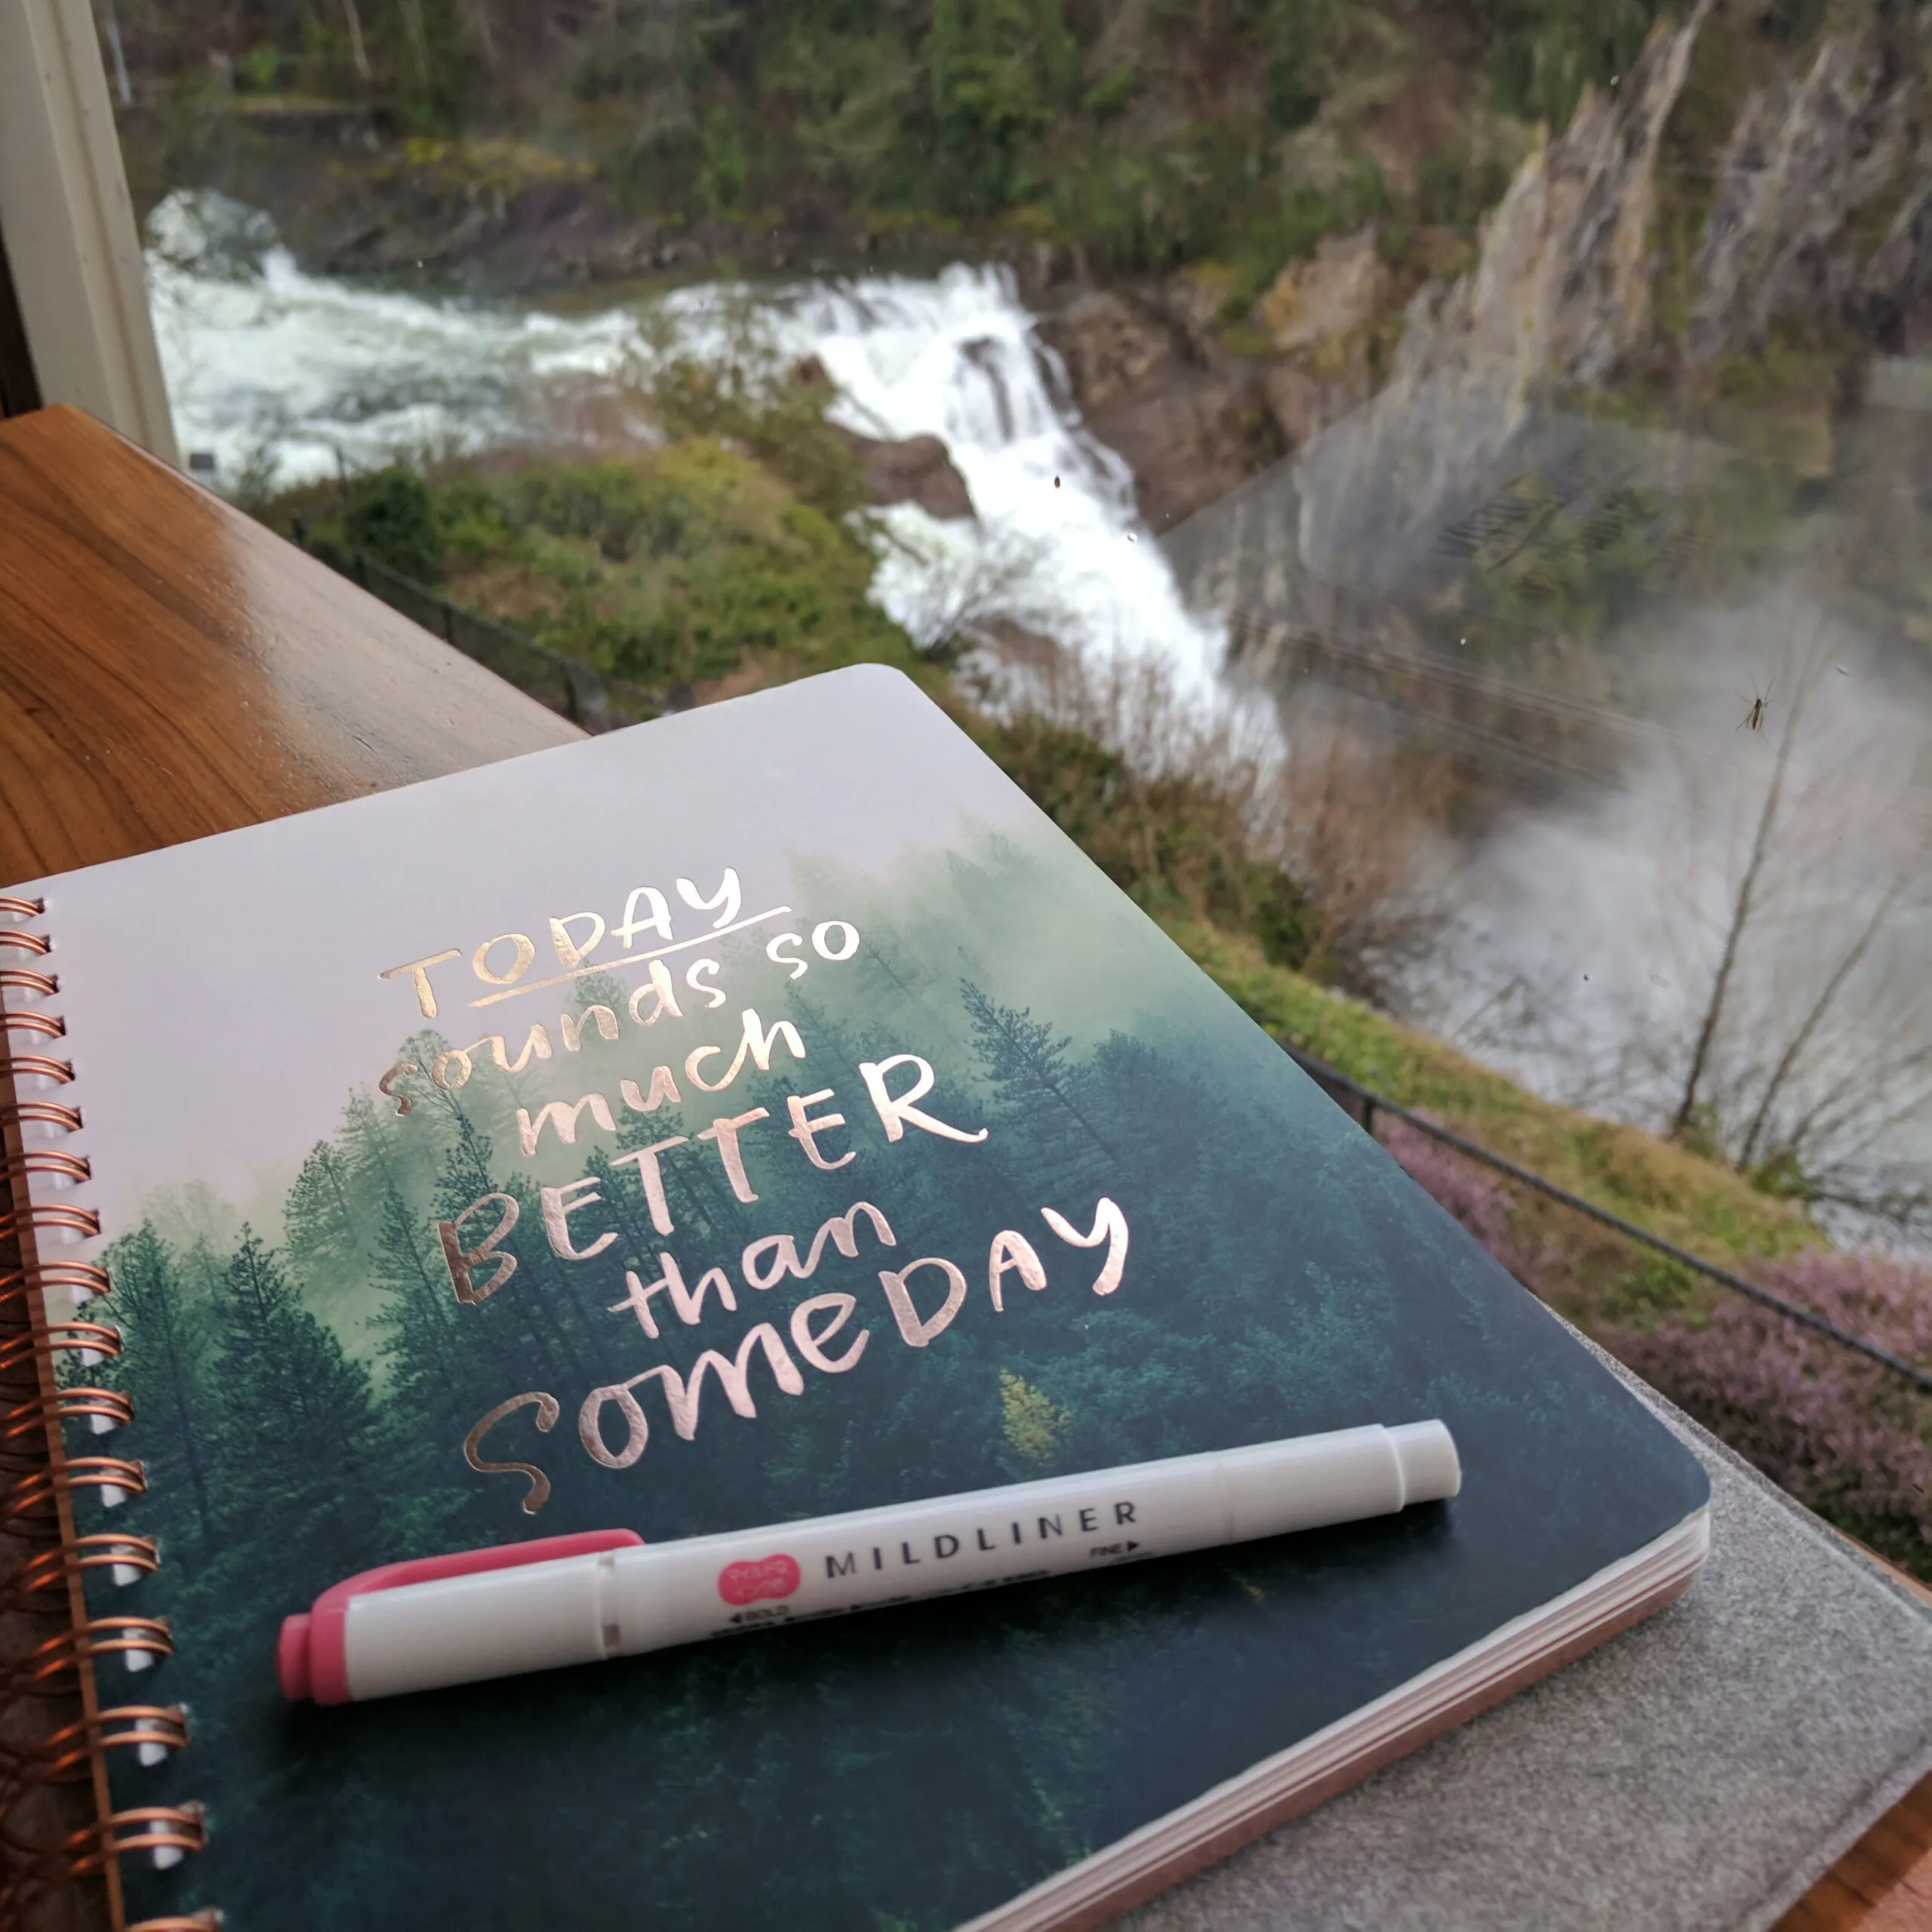 A journal and highlighter on a table near a window overlooking a waterfall.